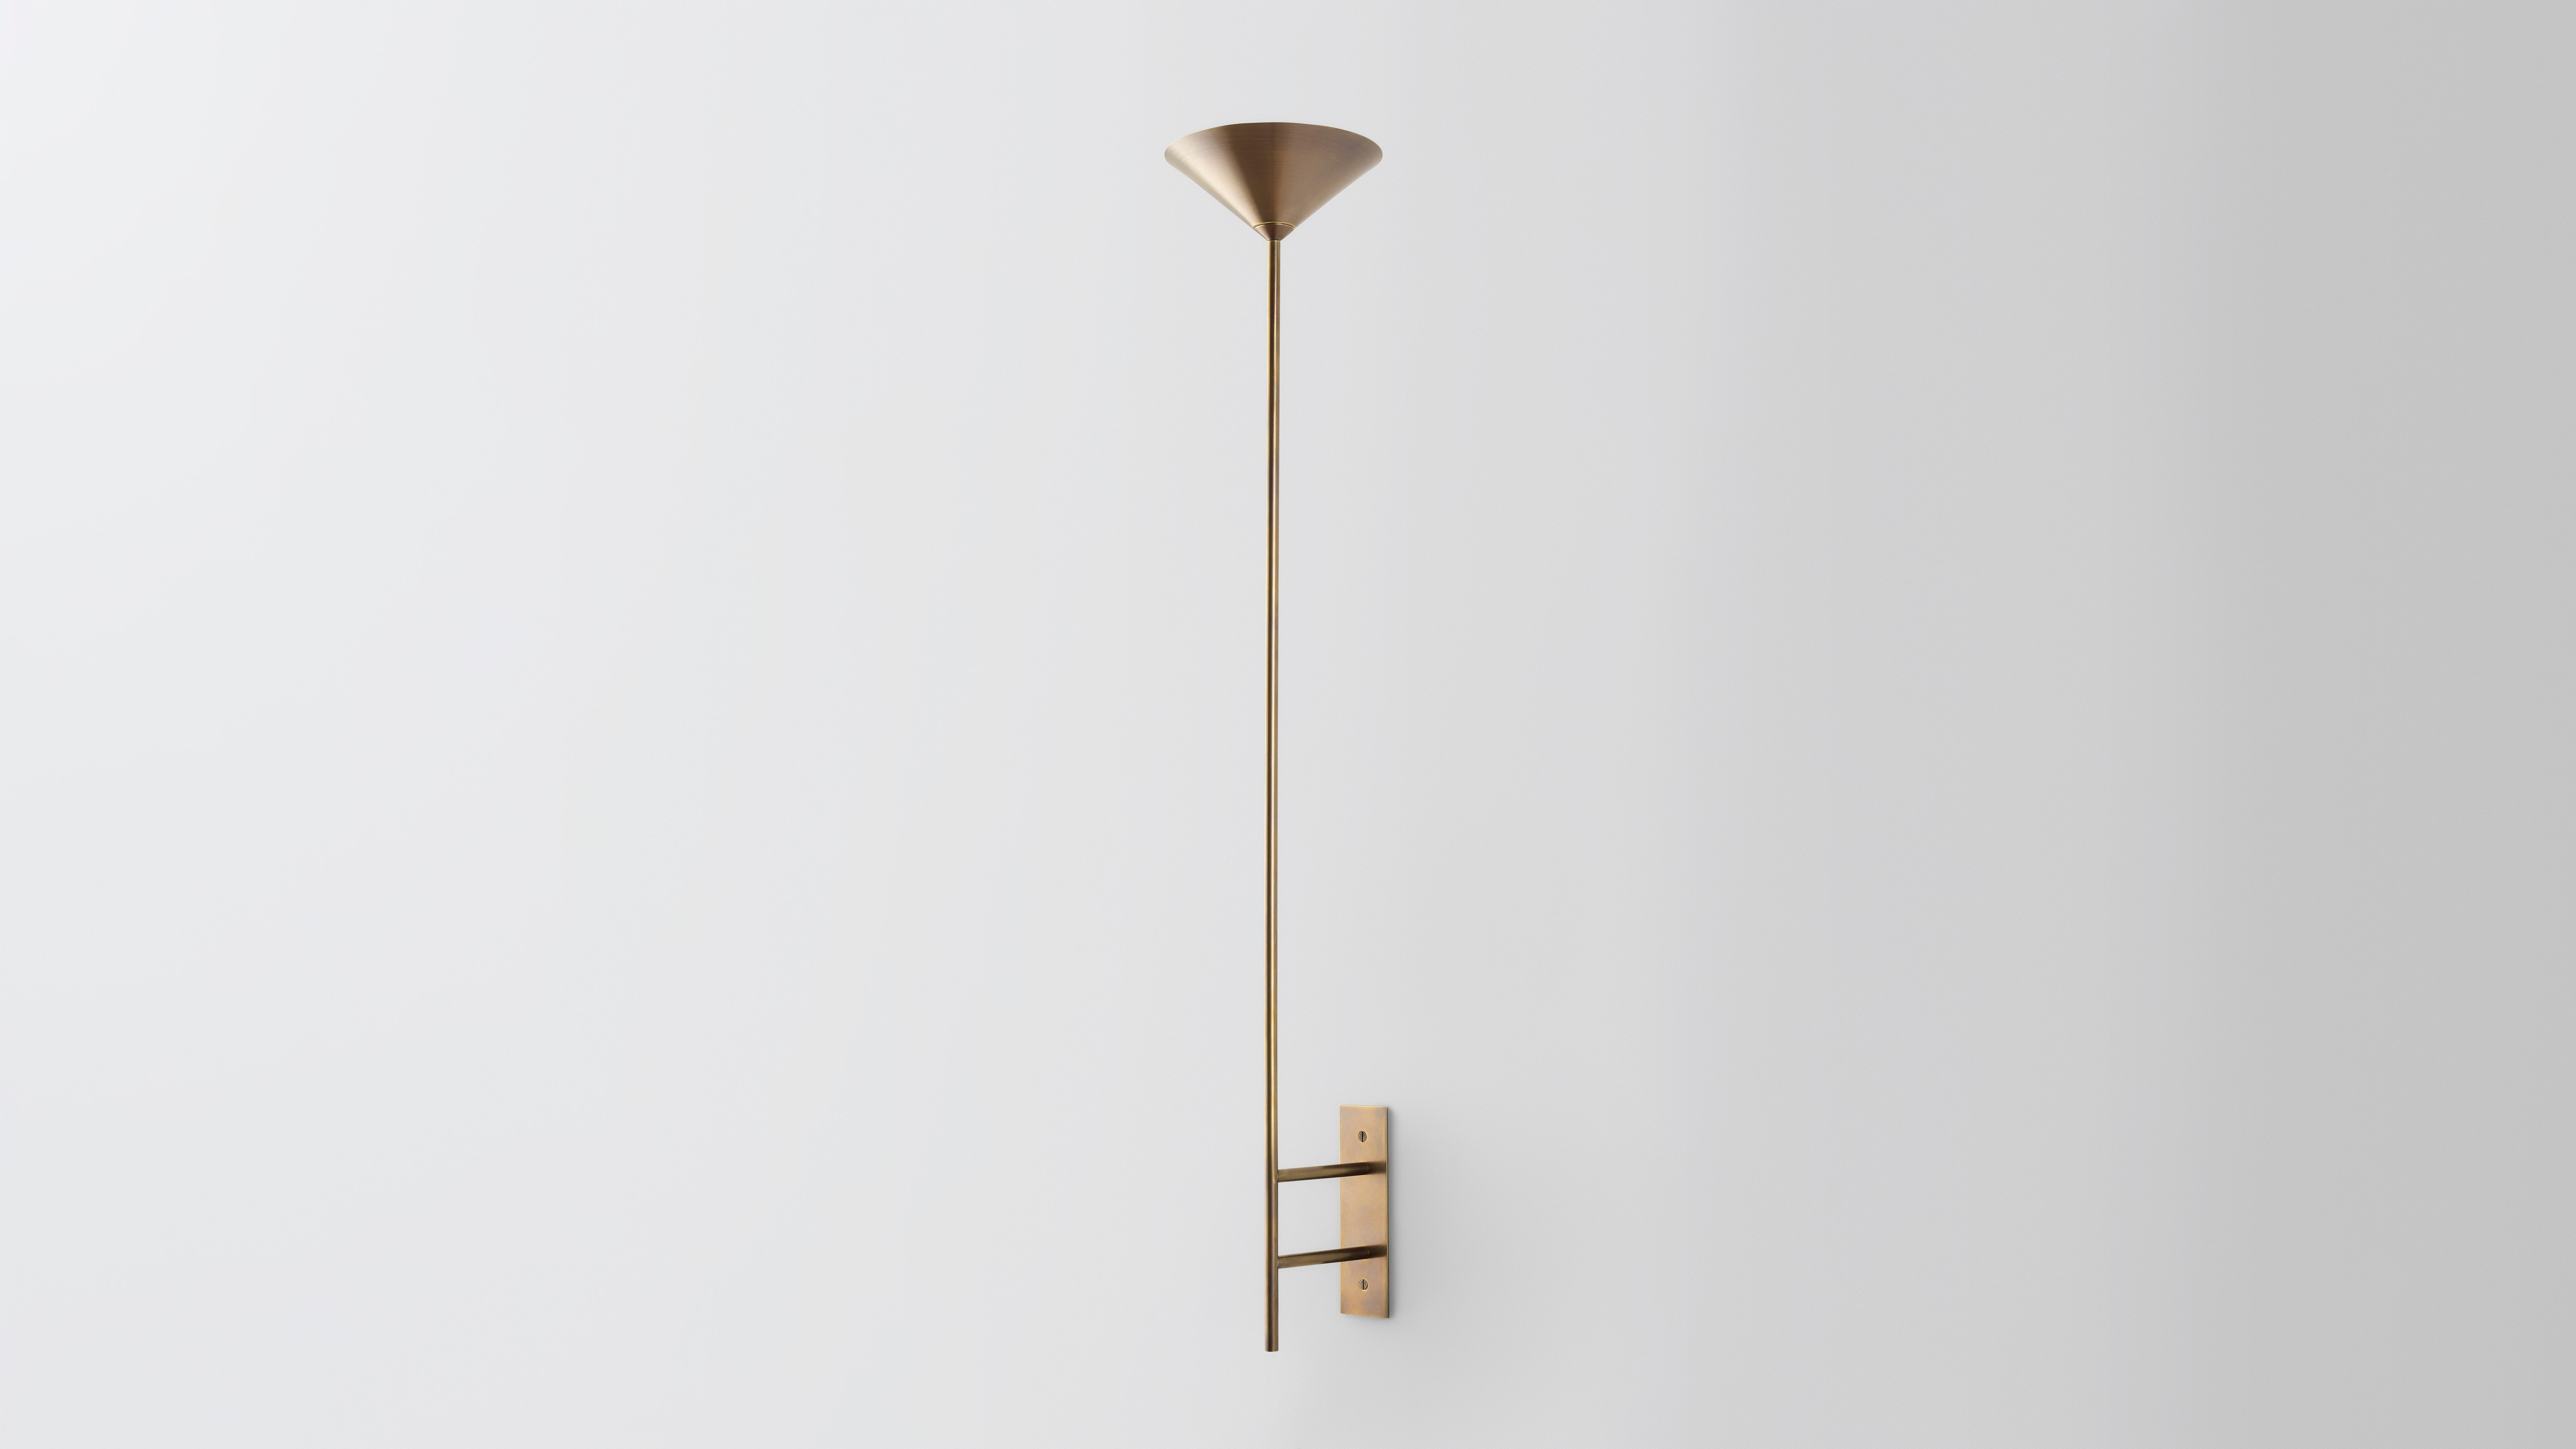 Wall Stack Up by Volker Haug 
-Pyramid Scheme Series-
Dimensions: W21 x D21 x H40 cm
Support: 20 cm
Suspension: Minimum 40 cm
Material: Brass
Available Finishes: Polished, brushed, or bronzed brass; enamel or chrome plated.
Custom finishes are